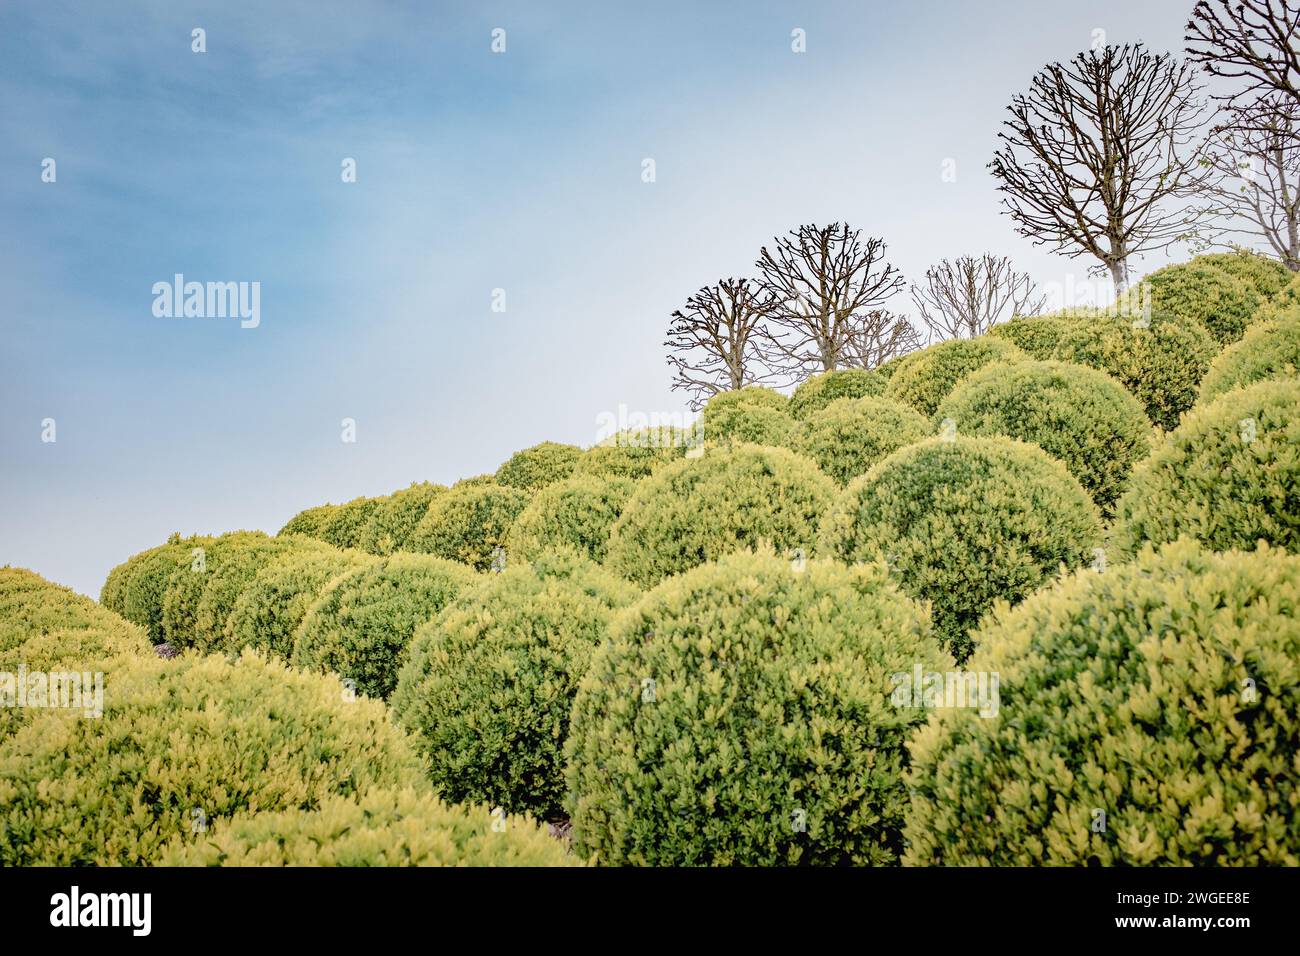 Topiary boxwood against a milky blue sky. Taken in a french garden on a partly cloudy early spring day with no people Stock Photo